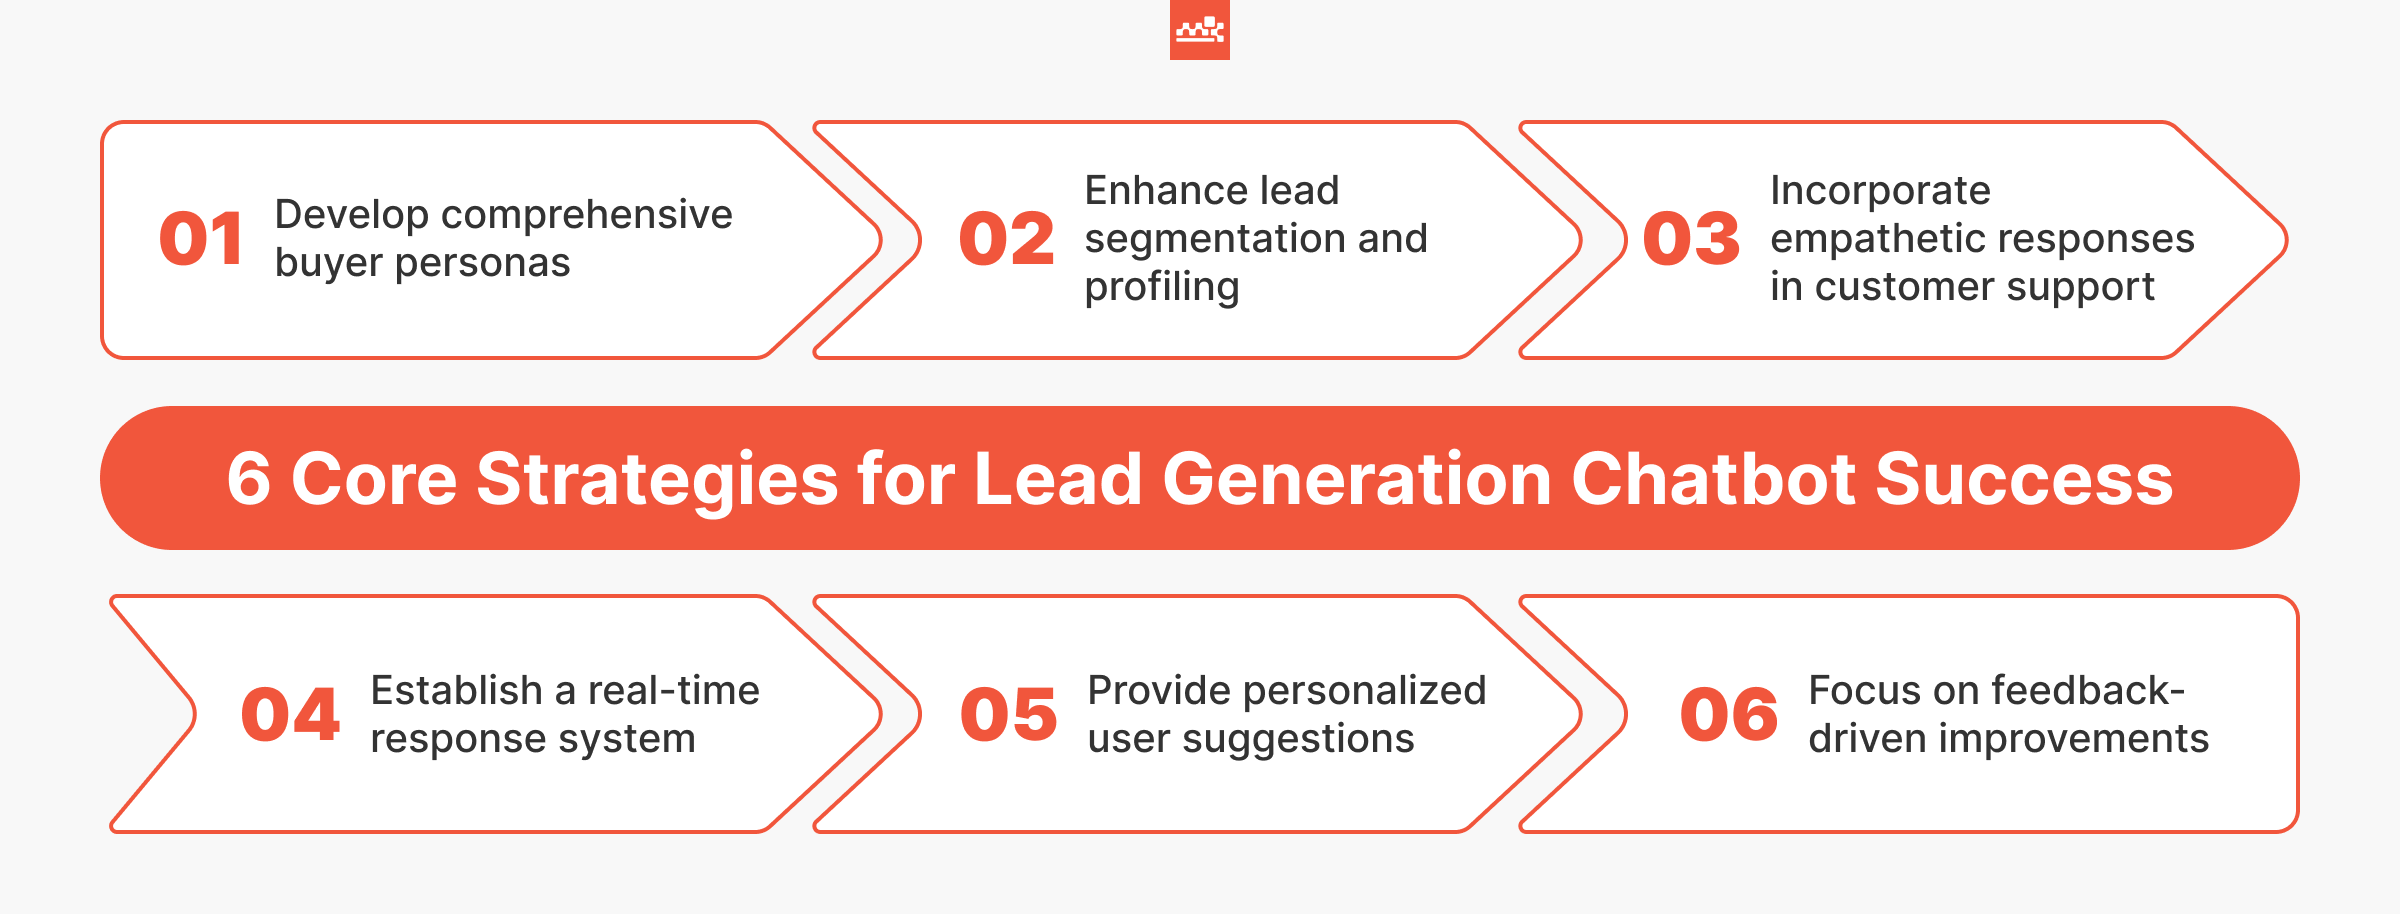 6 Core Strategies for Lead Generation Chatbots Success